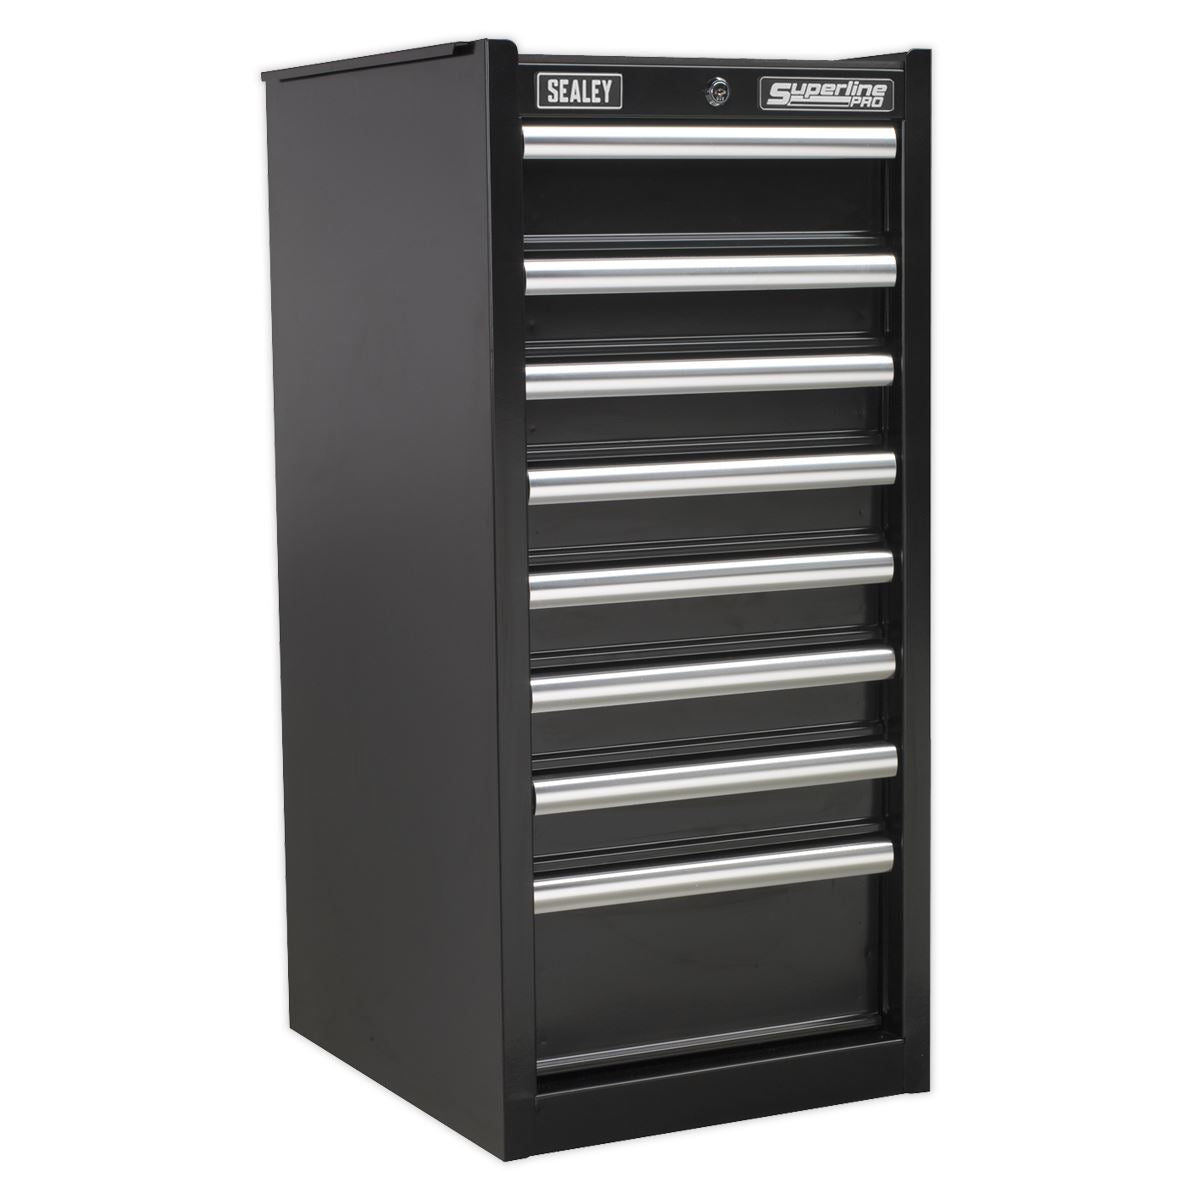 Sealey Superline Pro Hang-On Chest 8 Drawer with Ball-Bearing Slides - Black